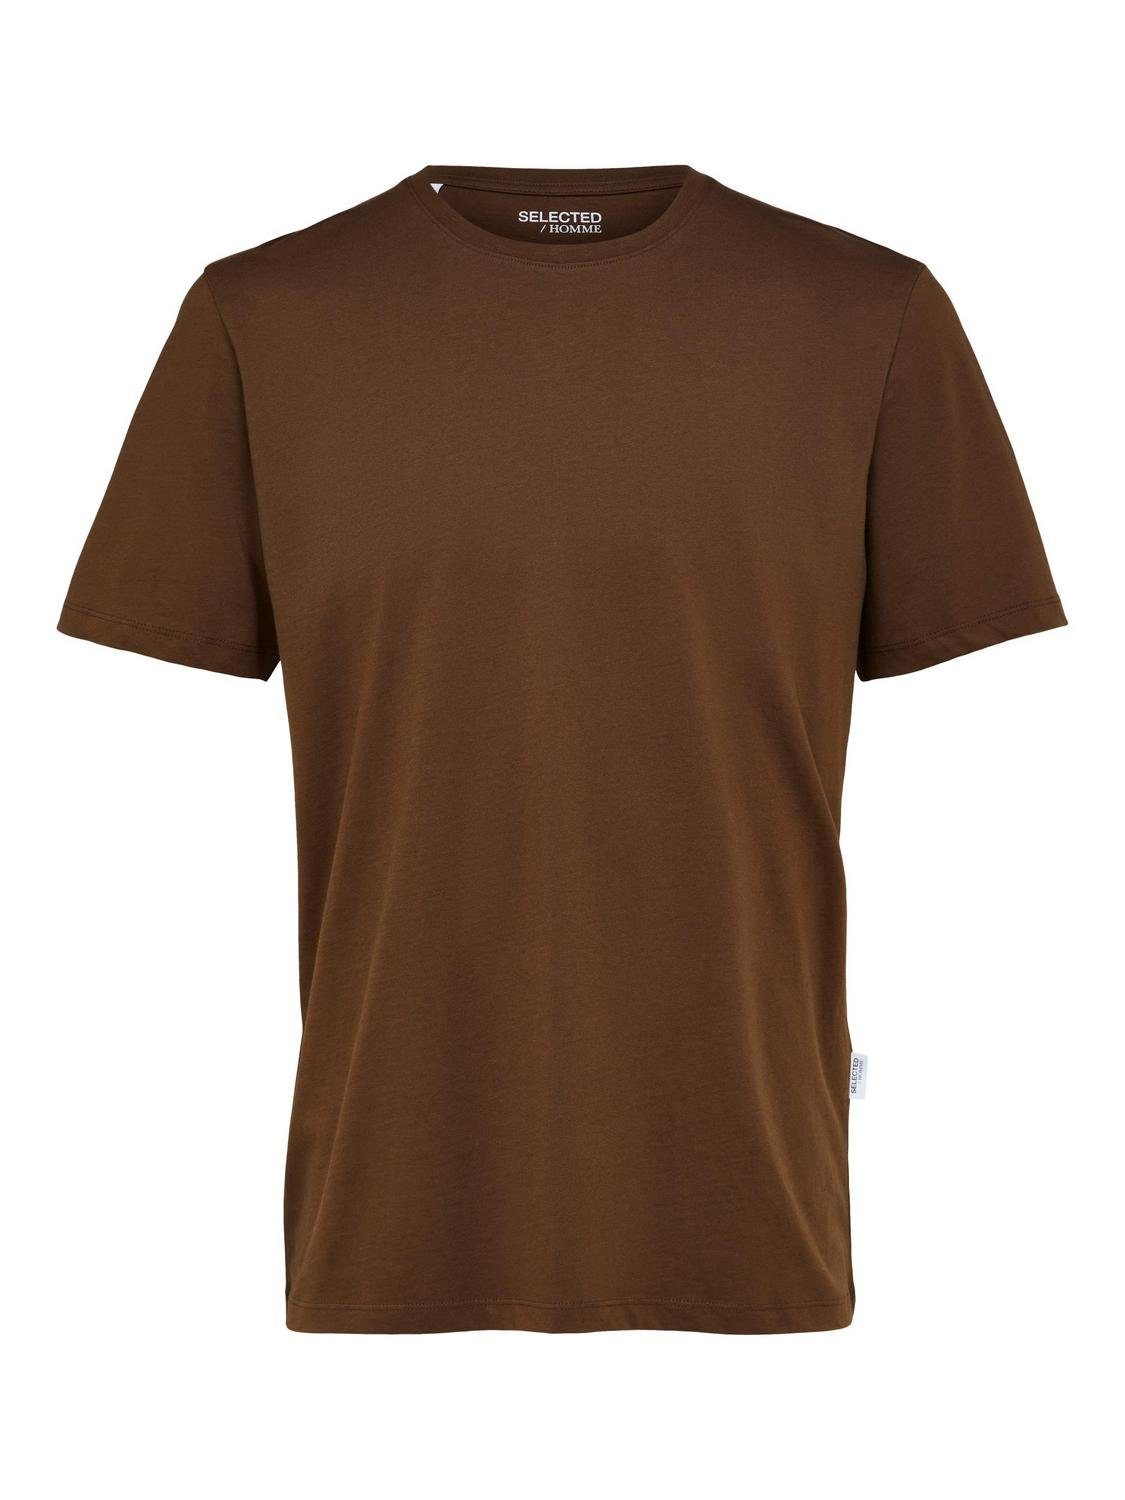 HOMME SS SELECTED TEE NOOS SLHASPEN O-NECK T-Shirt